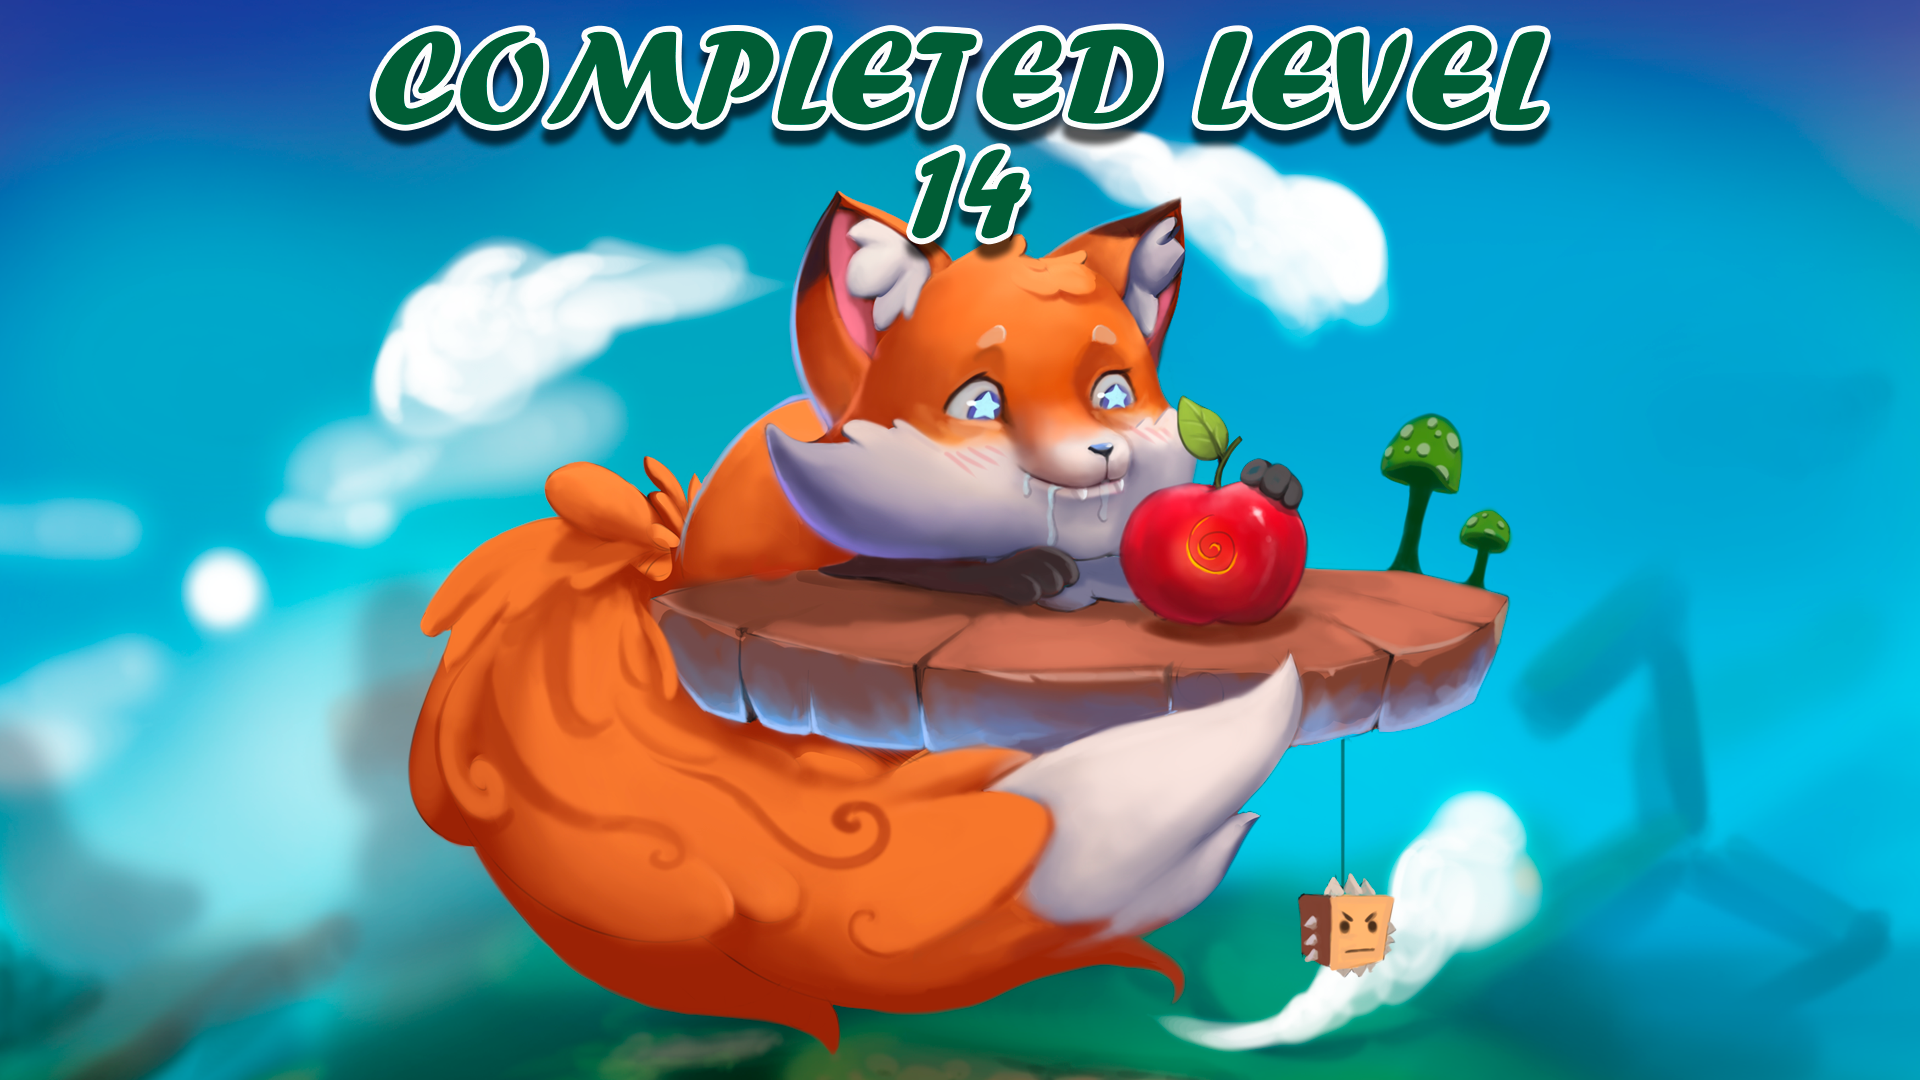 14 levels completed